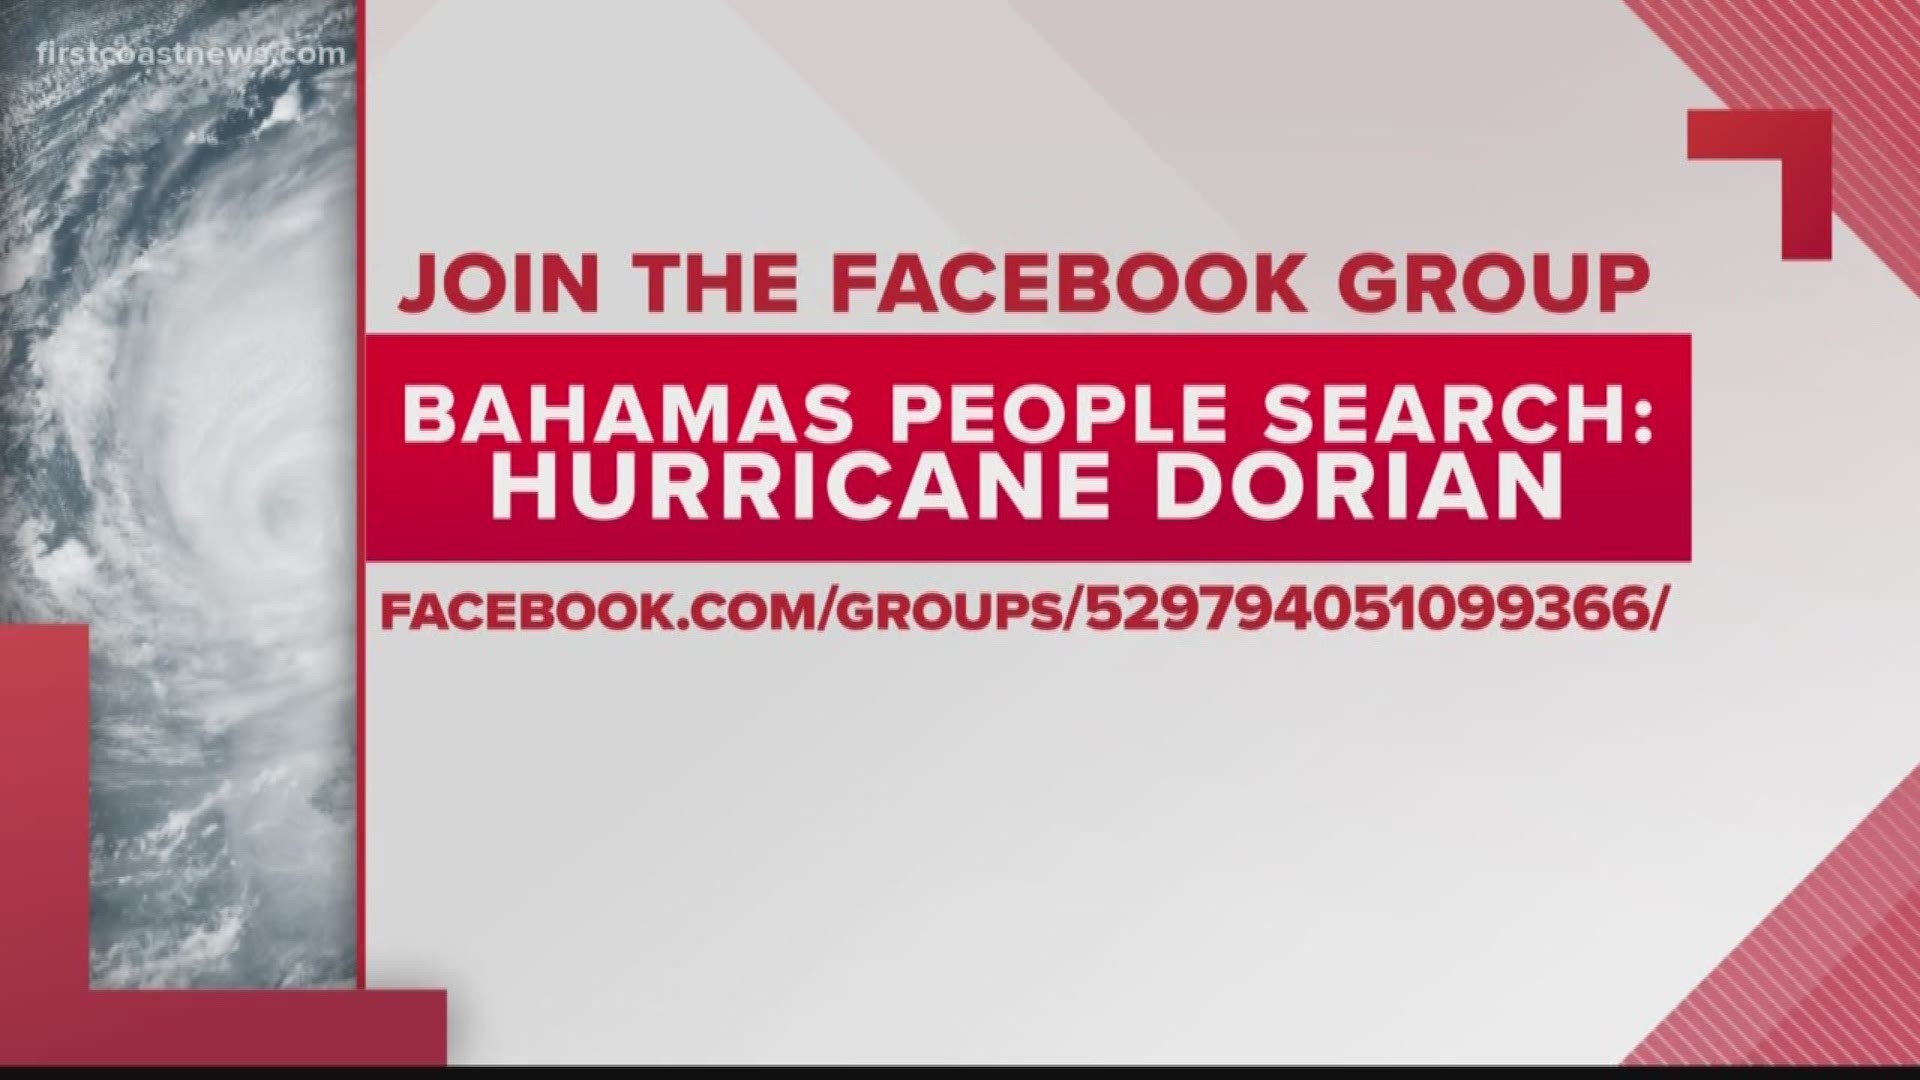 There are still thousands of people missing across the Bahamas.